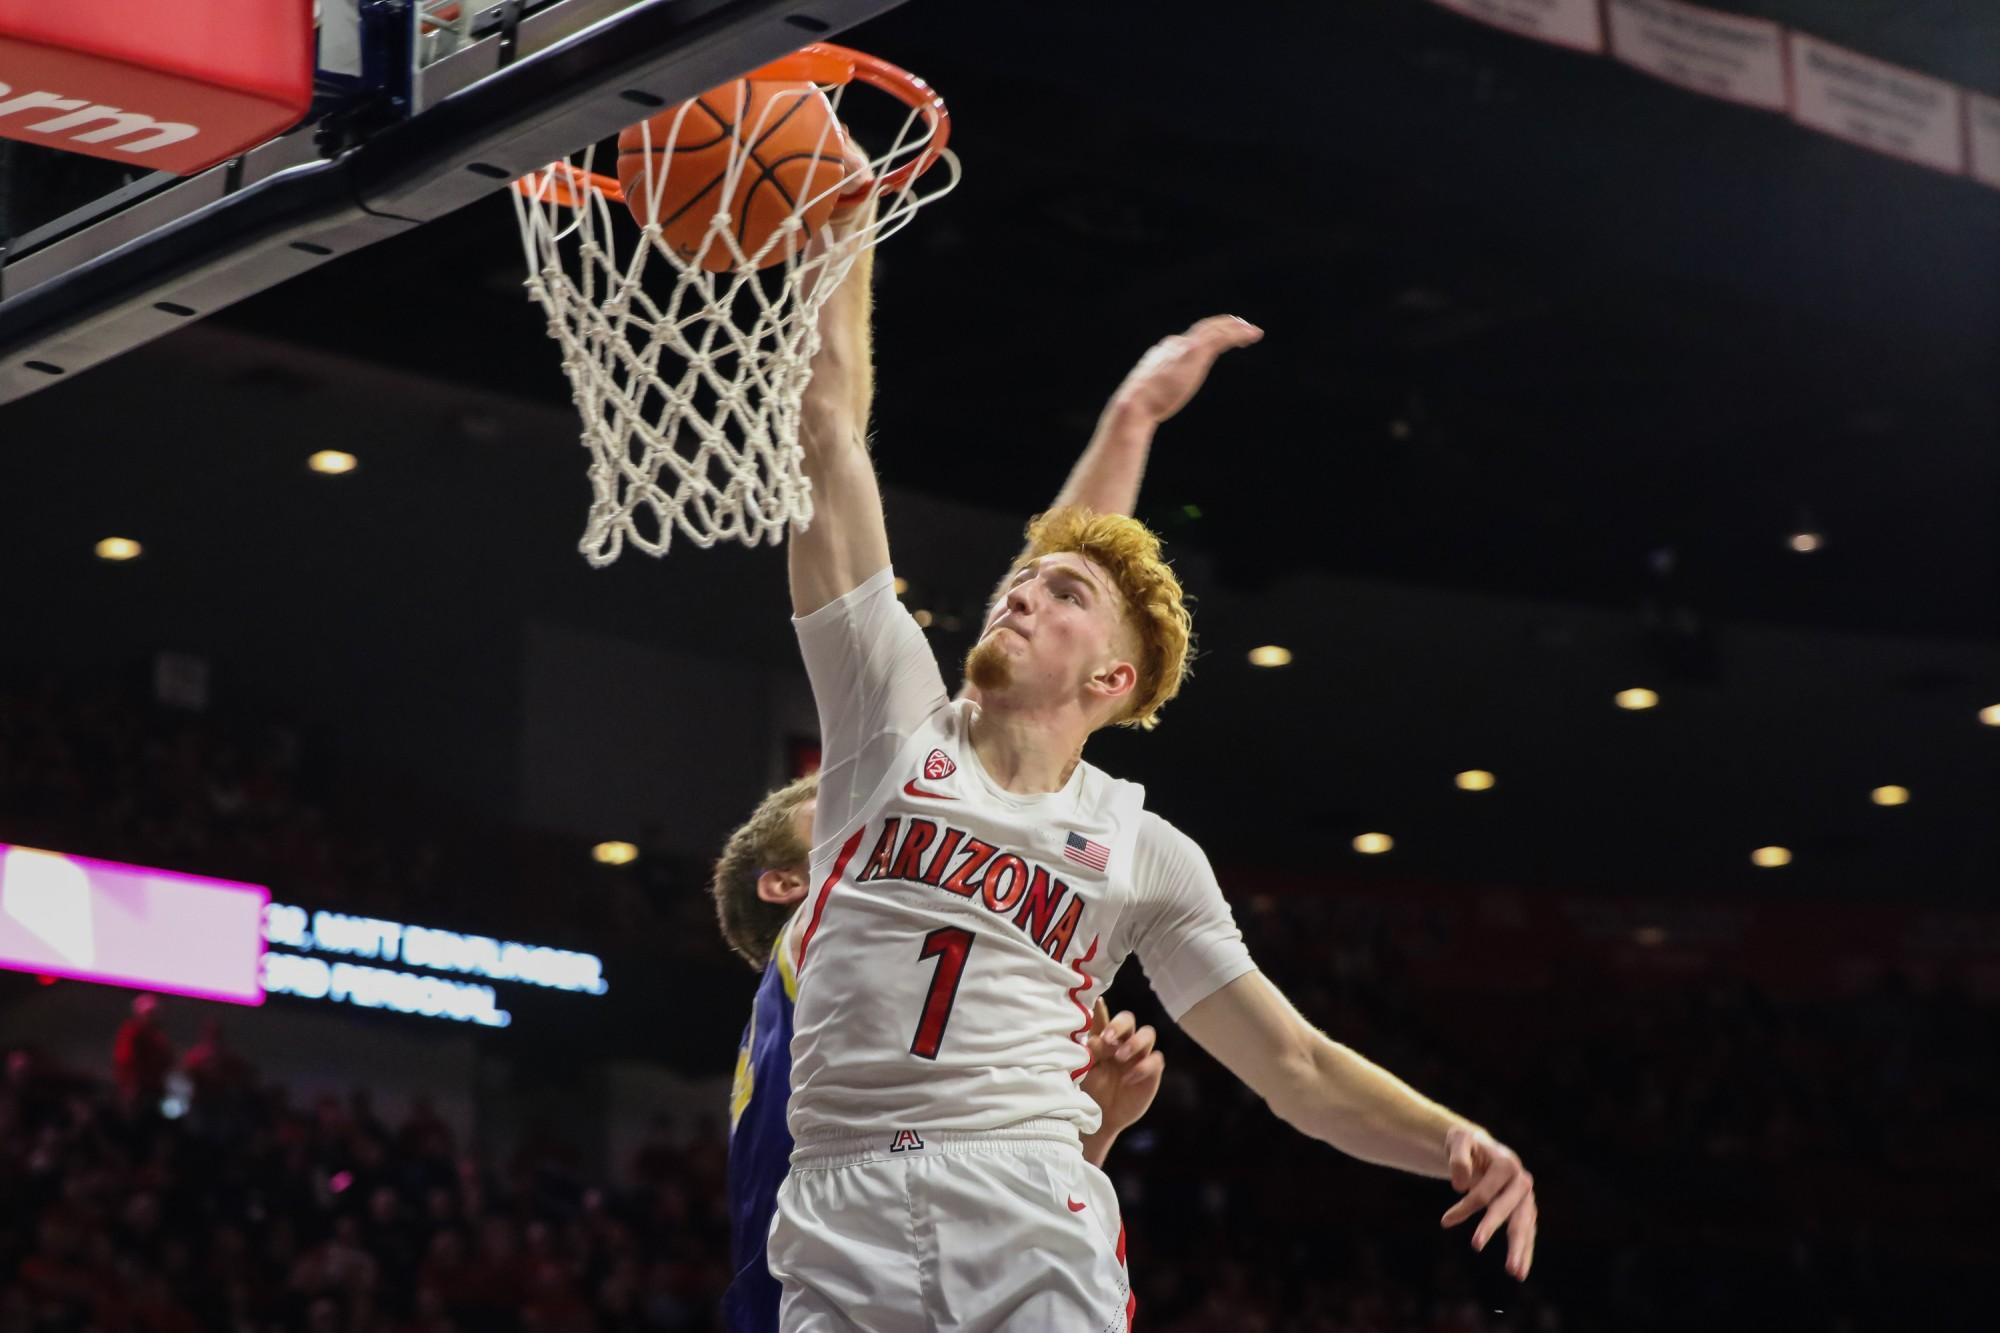 Nico Mannion (1) dunks the ball into the basket during the last few minutes of the Arizona-South Dakota State game in the McKale Center on Thursday November 21. The Wildcats continue their winning streak by defeating the Jackrabbits 71-64.